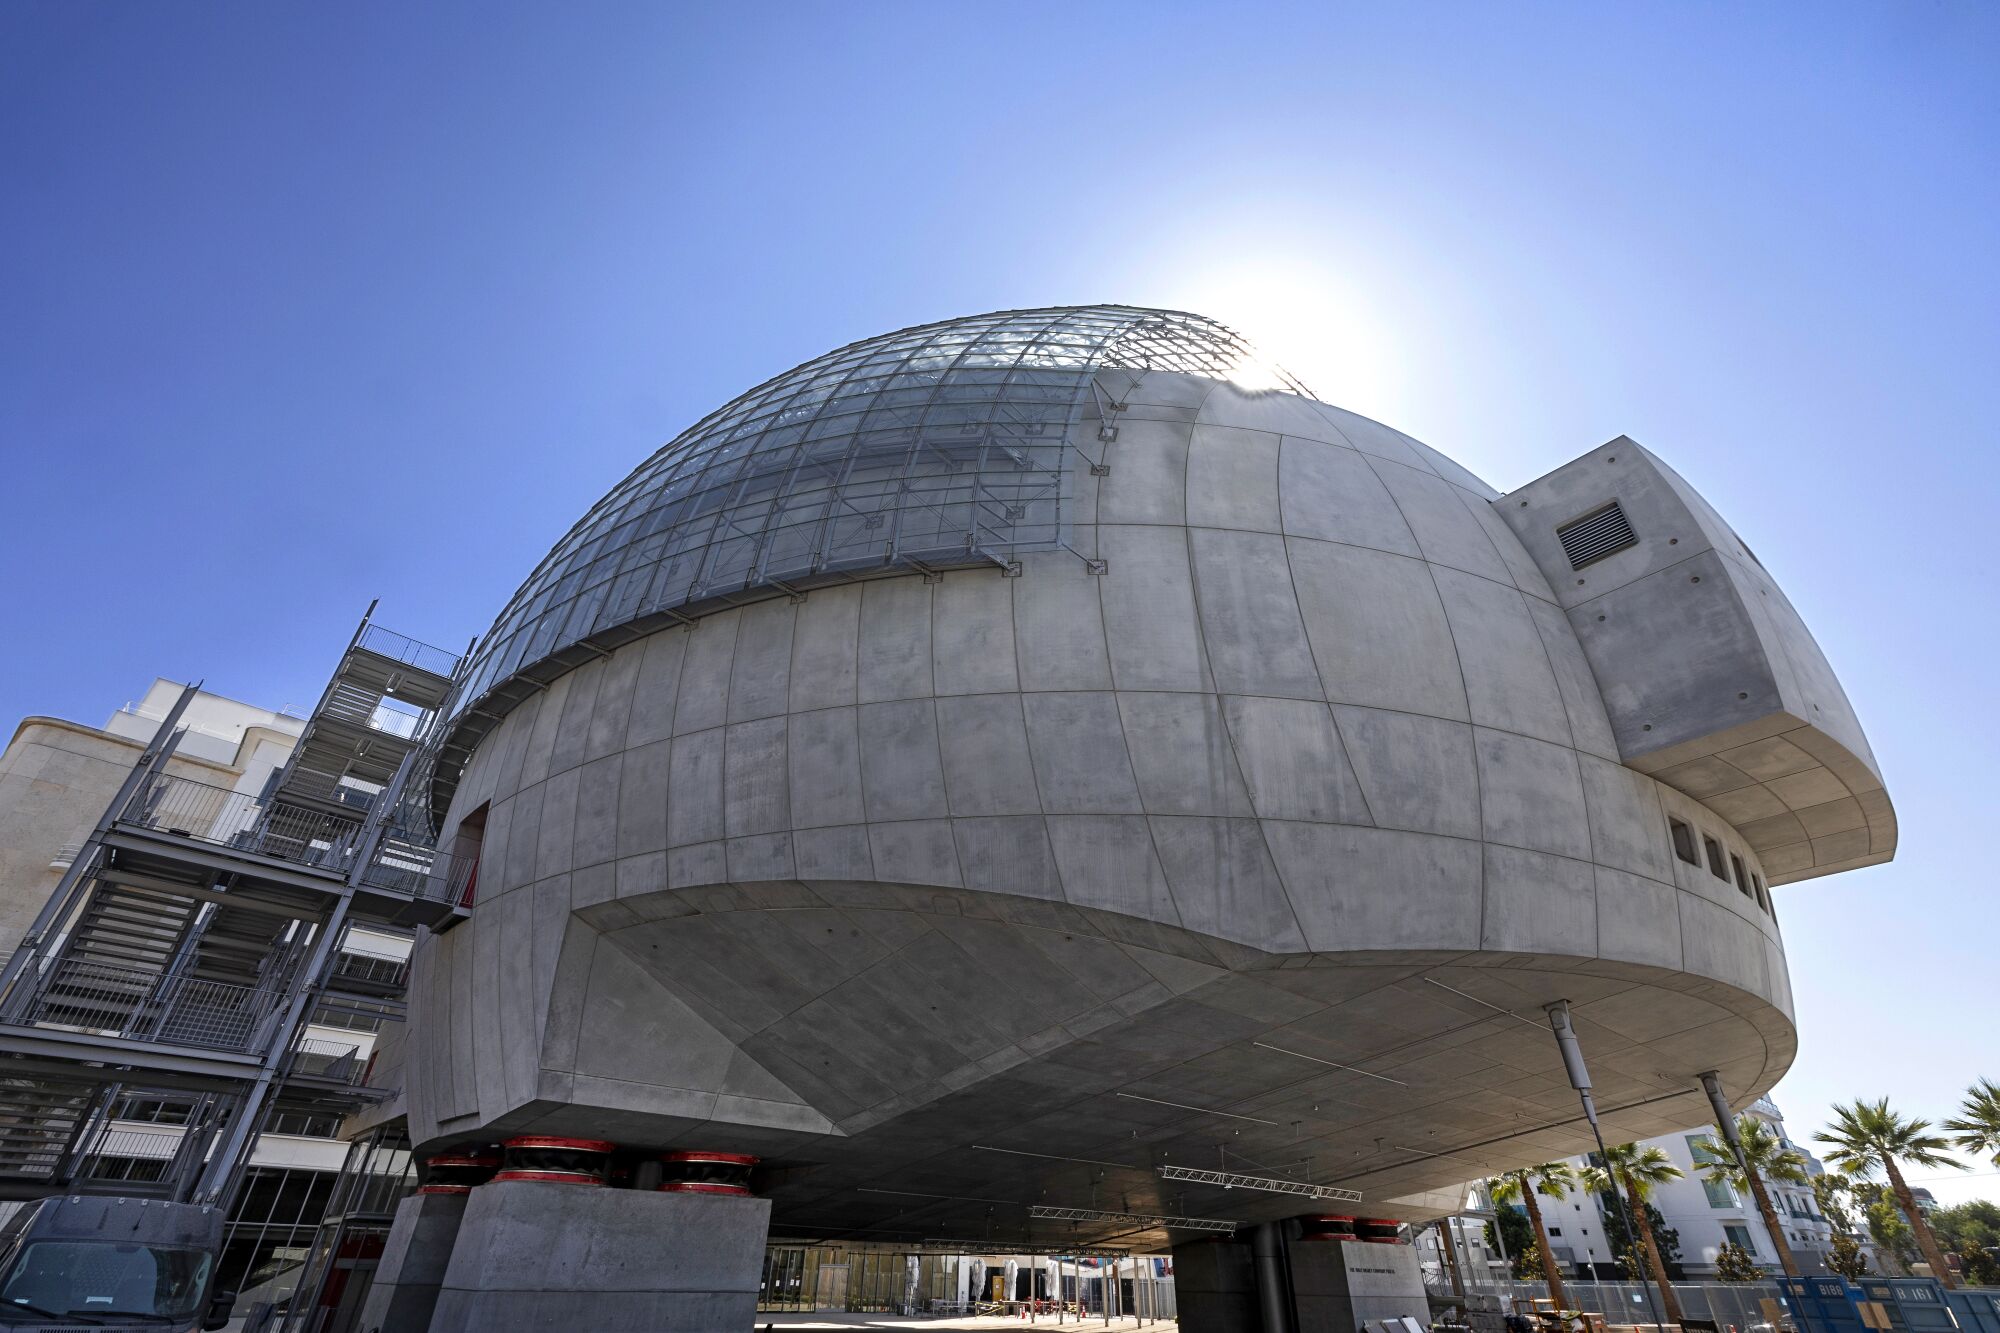 The Academy Museum's spherical David Geffen Theater hovers over a public plaza. 